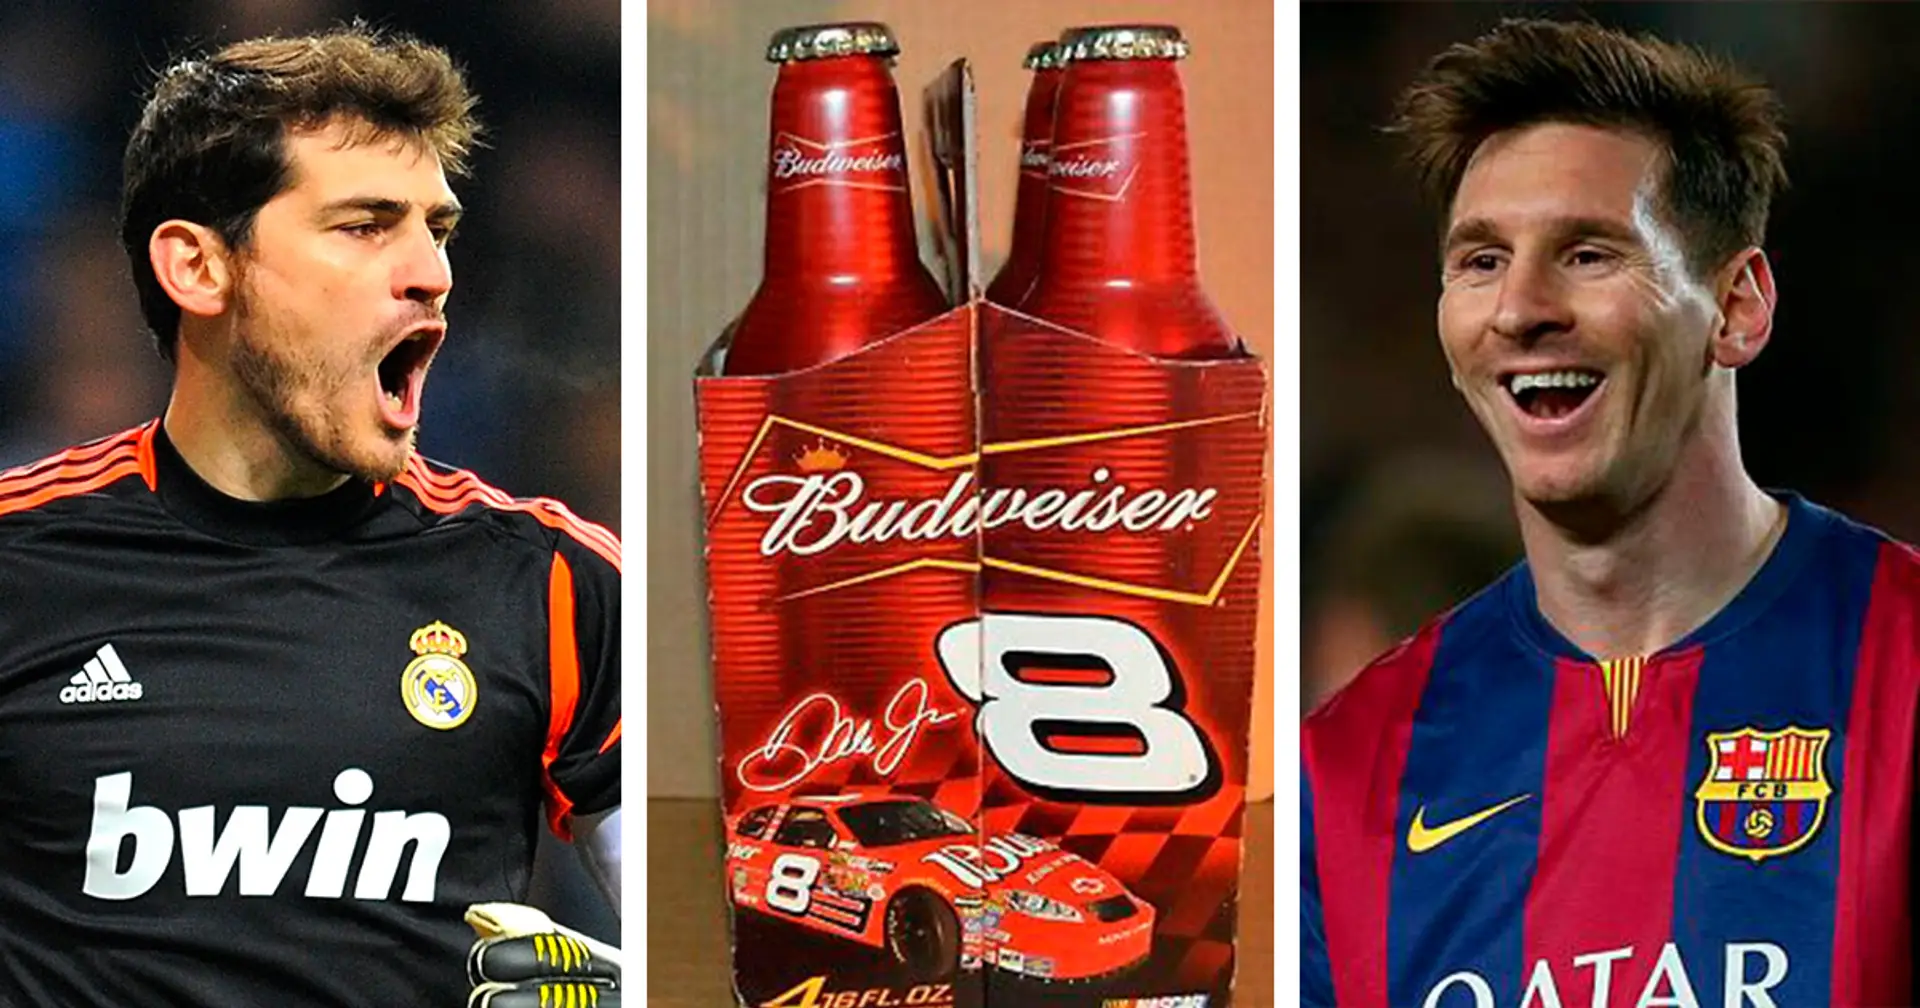 Path to alcoholism: How many bottles of beer Iker Casillas gets for conceding goals against Messi